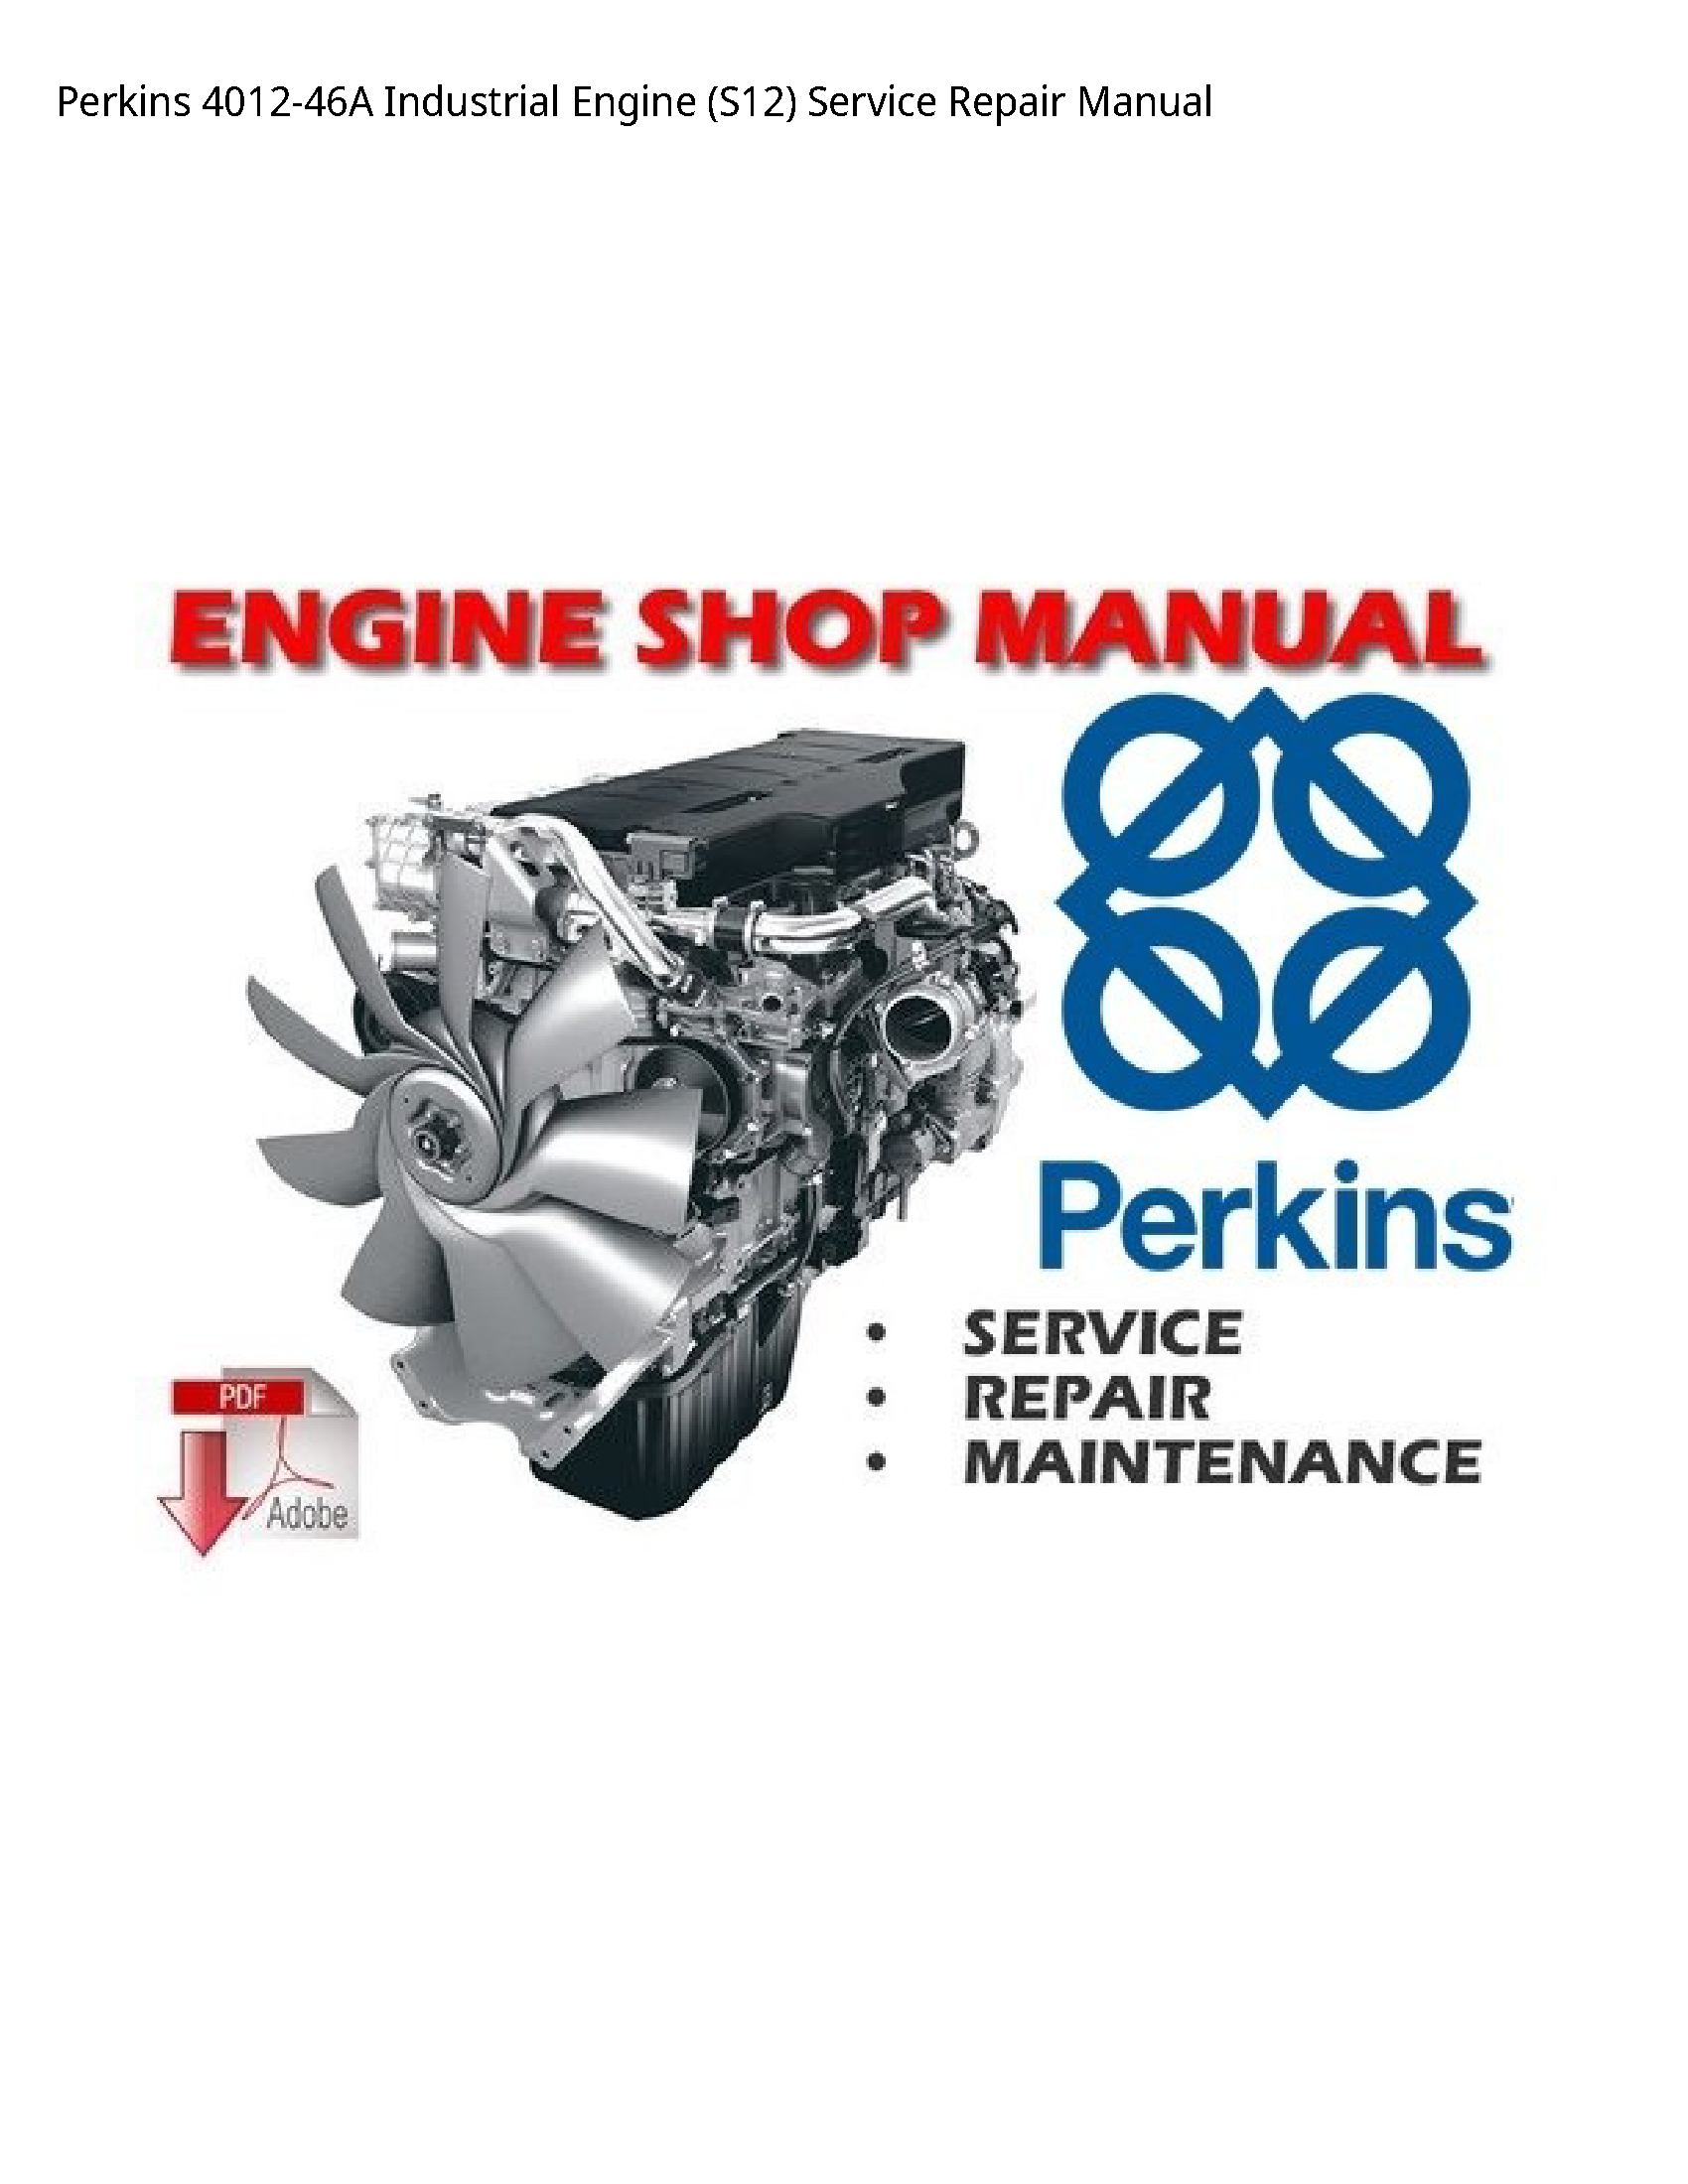 Perkins 4012-46A Industrial Engine manual